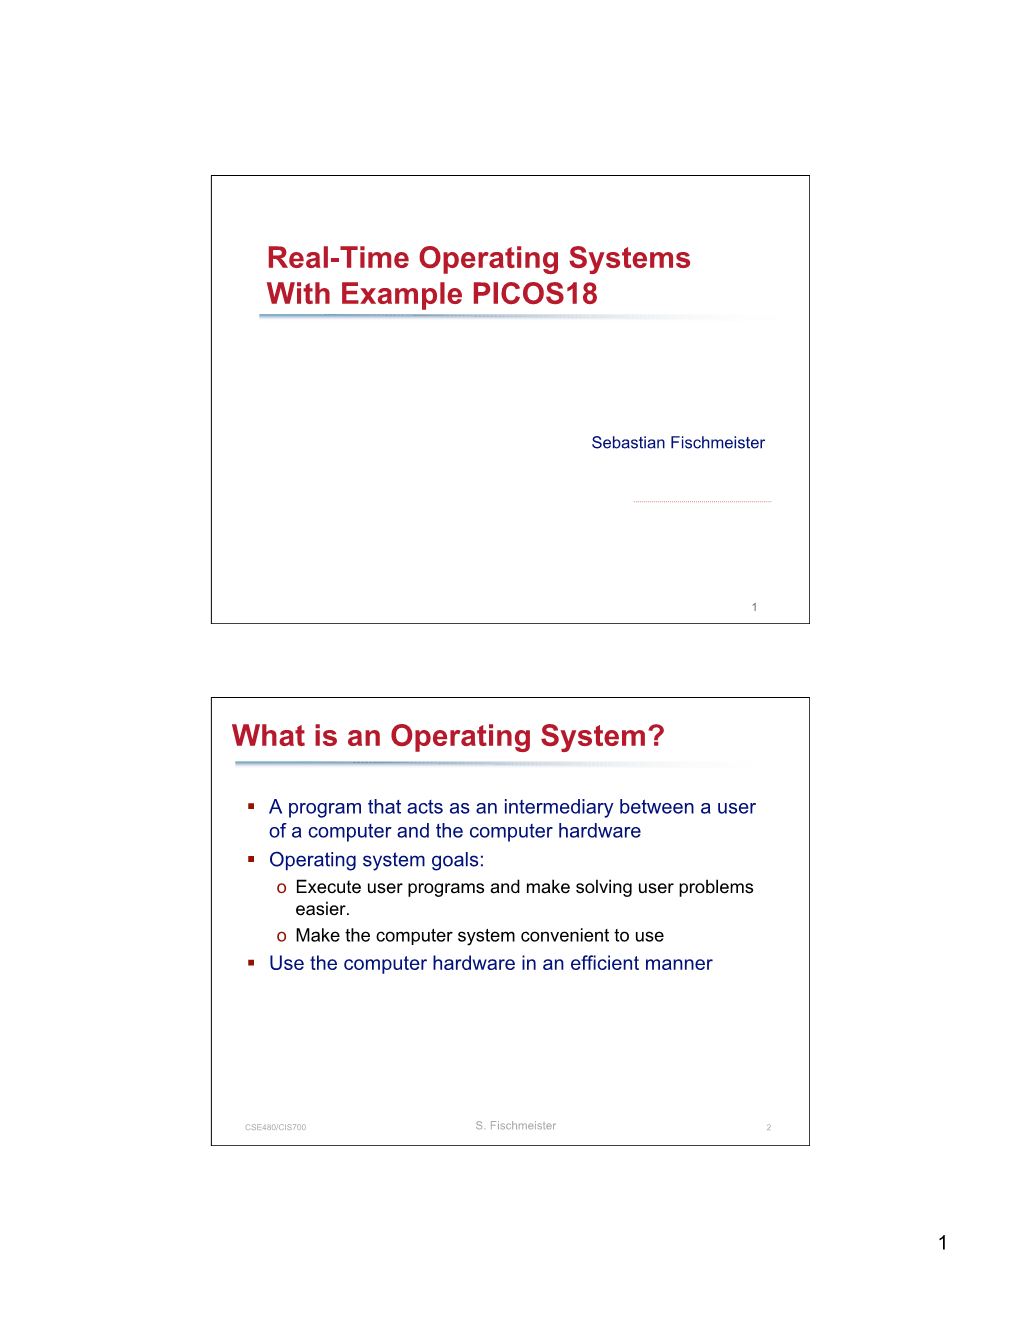 Real-Time Operating Systems with Example PICOS18